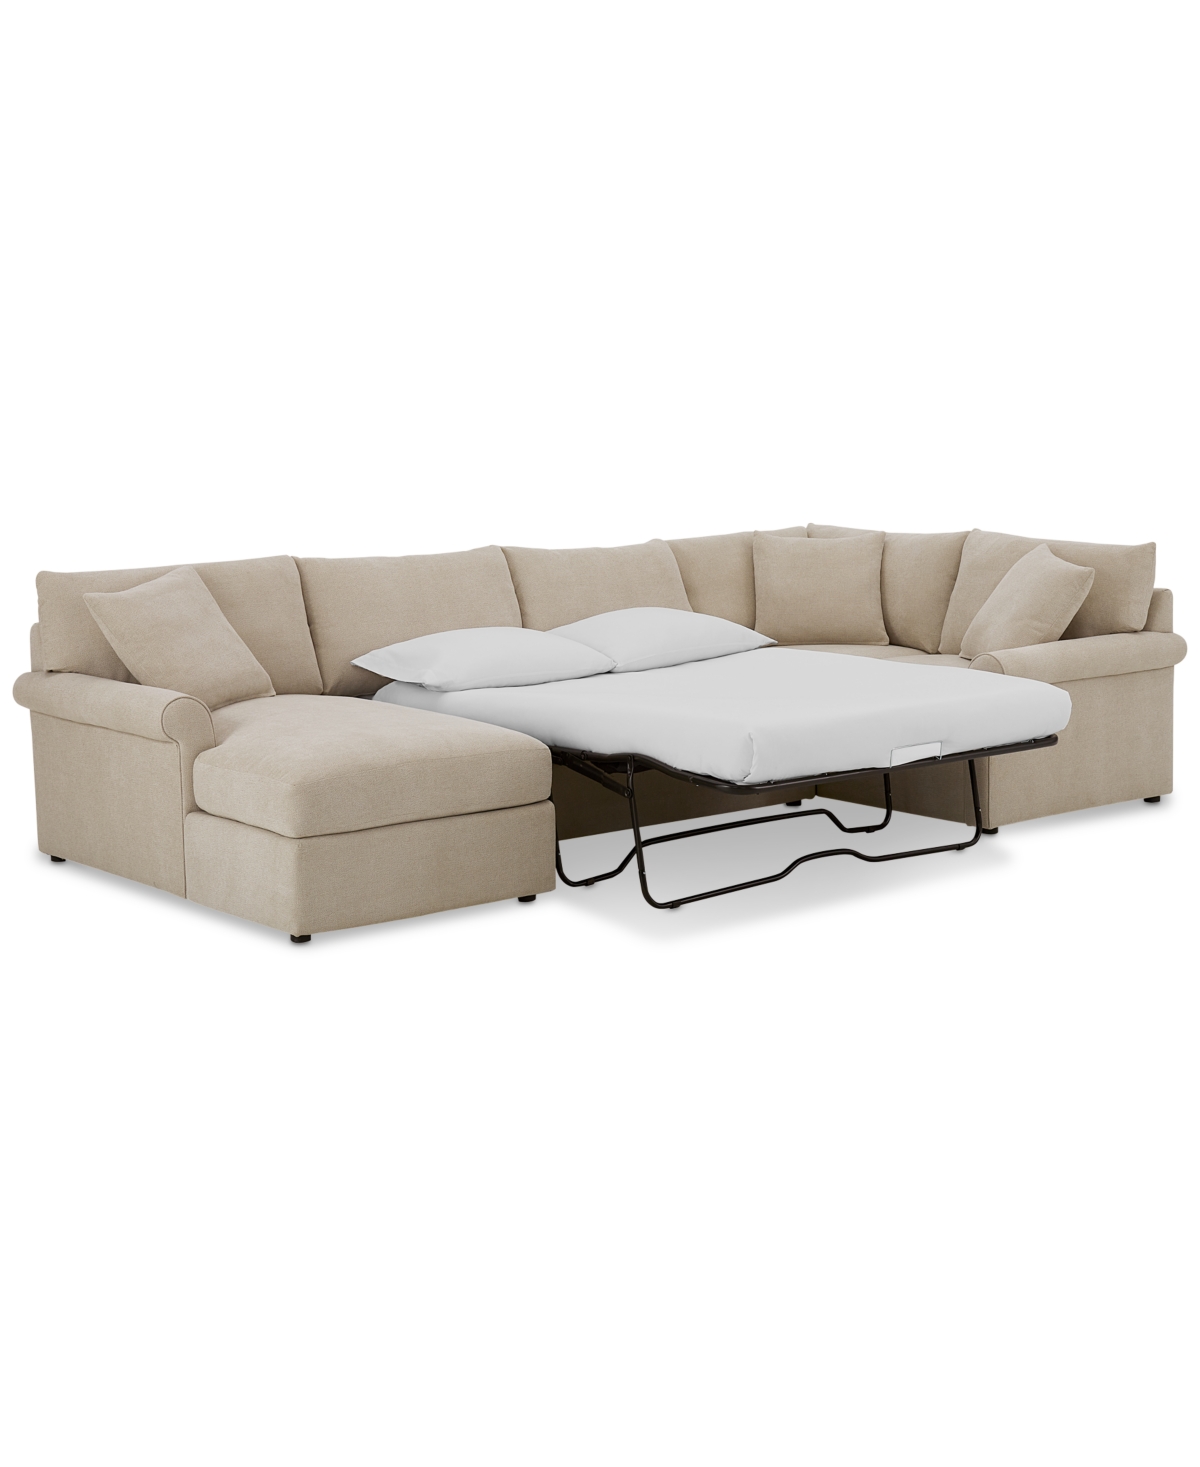 Furniture Wrenley 138" 4-pc. Fabric Modular Chaise Sleeper Sectional Sofa, Created For Macy's In Dove